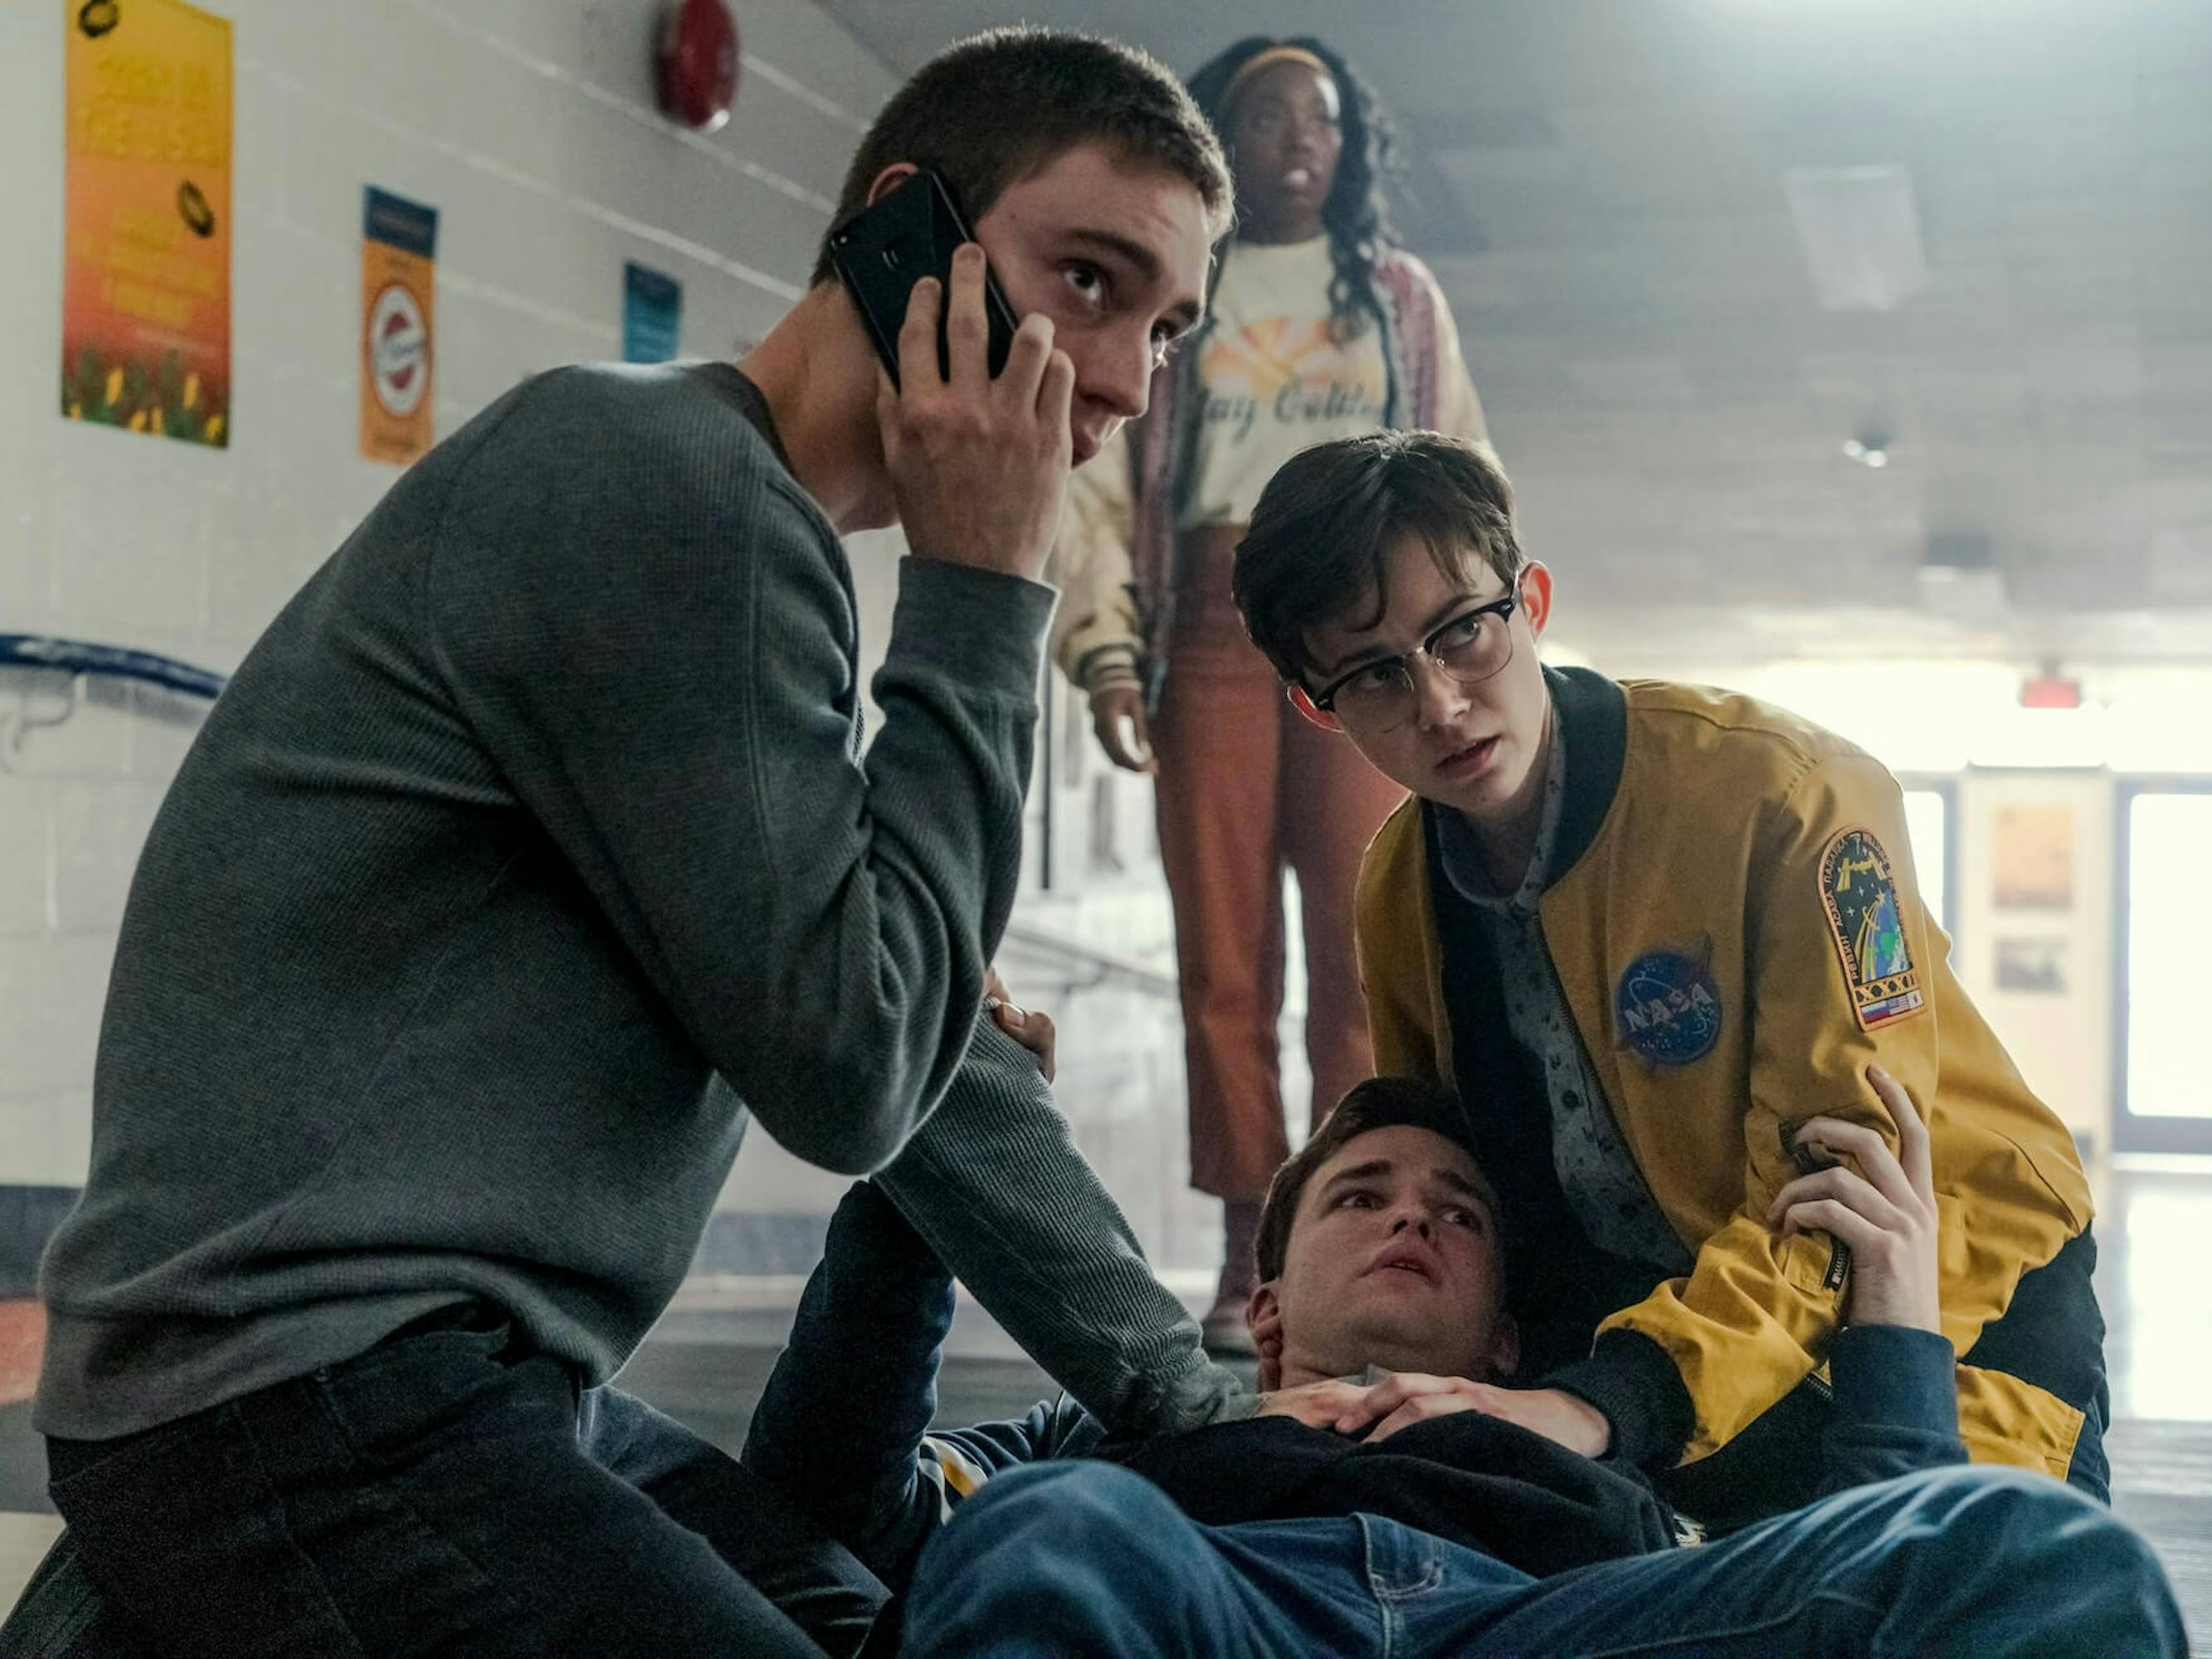 Ollie Larsson (Théodore Pellerin), Alex Crisp (Asjha Cooper), Caleb Greeley (Burkely Duffield), and Darby (Jesse Latourette) stand in a deserted halfway. Caleb lies on the ground as Ollie and Darby tend to him, while Alex stands behind them. Ollie makes a call with an urgent expression on his face.